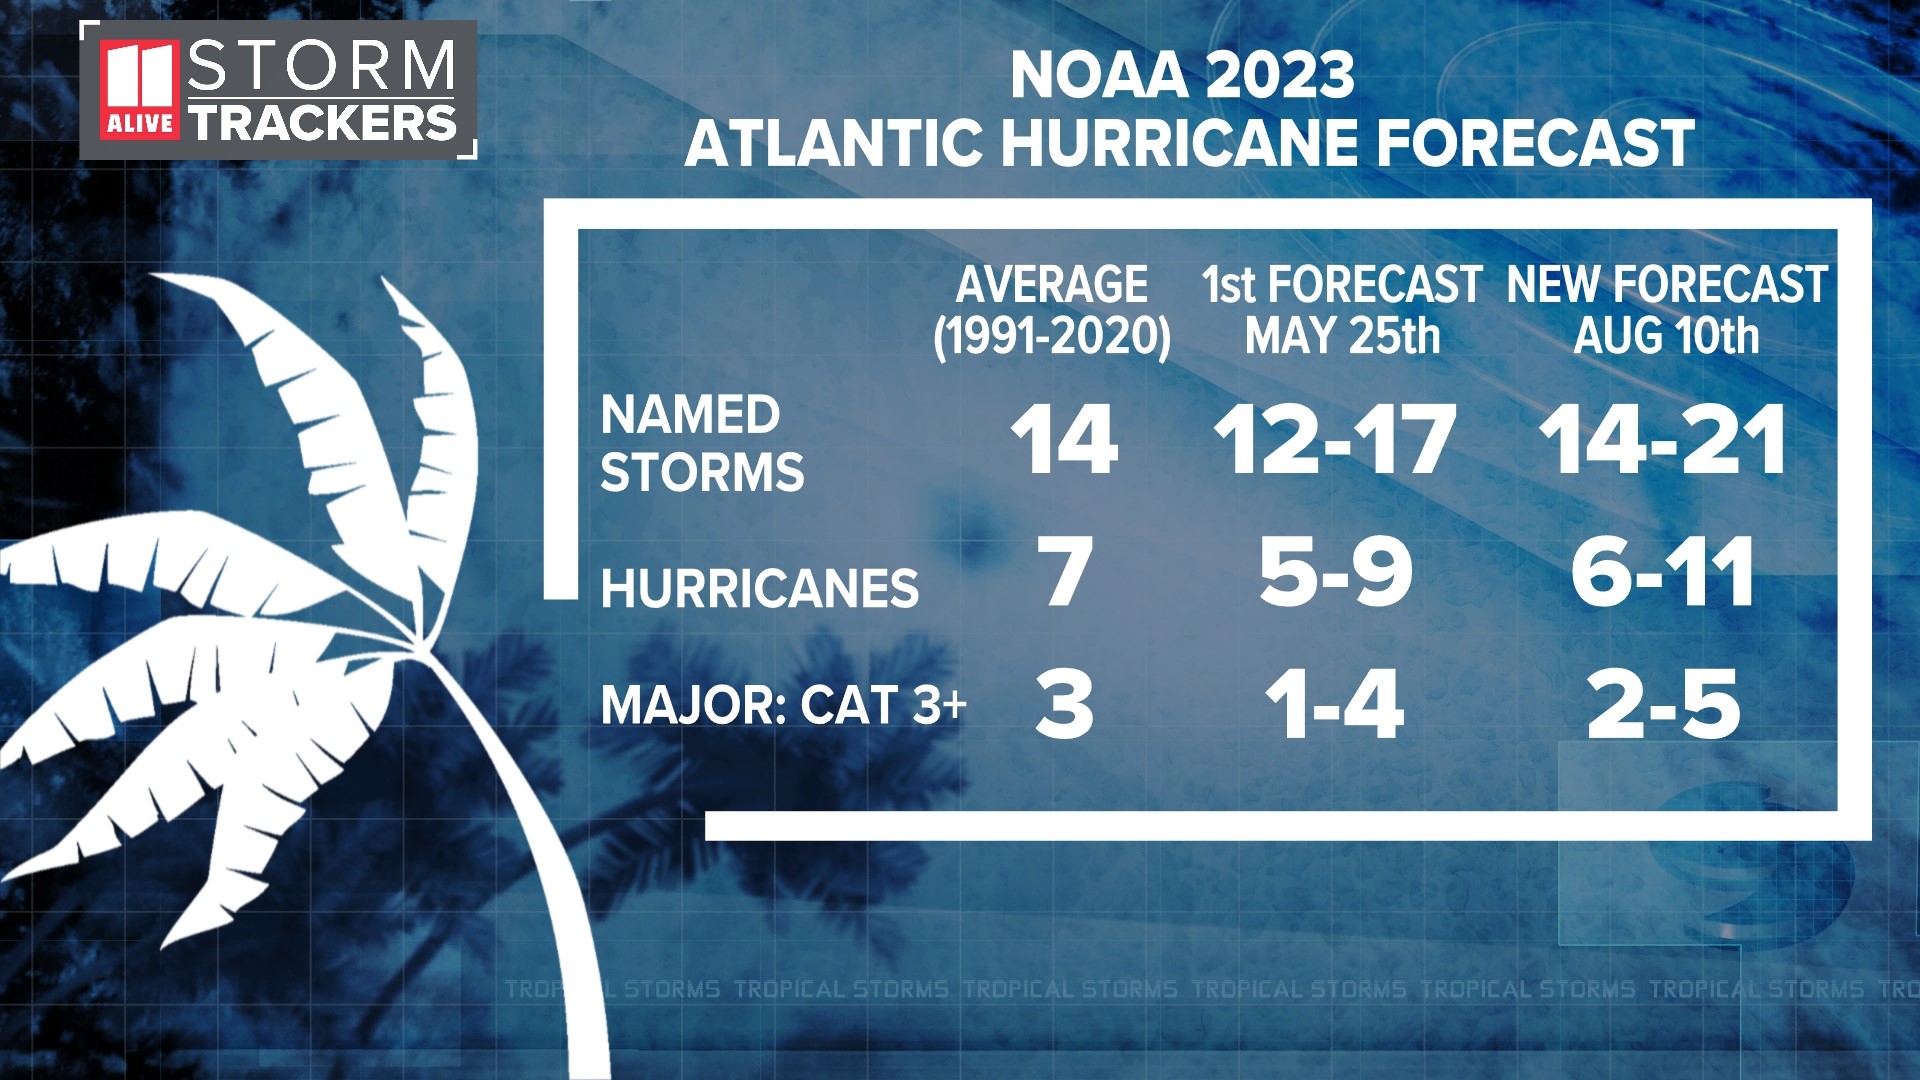 They increased the probability of an above-average season in the Atlantic